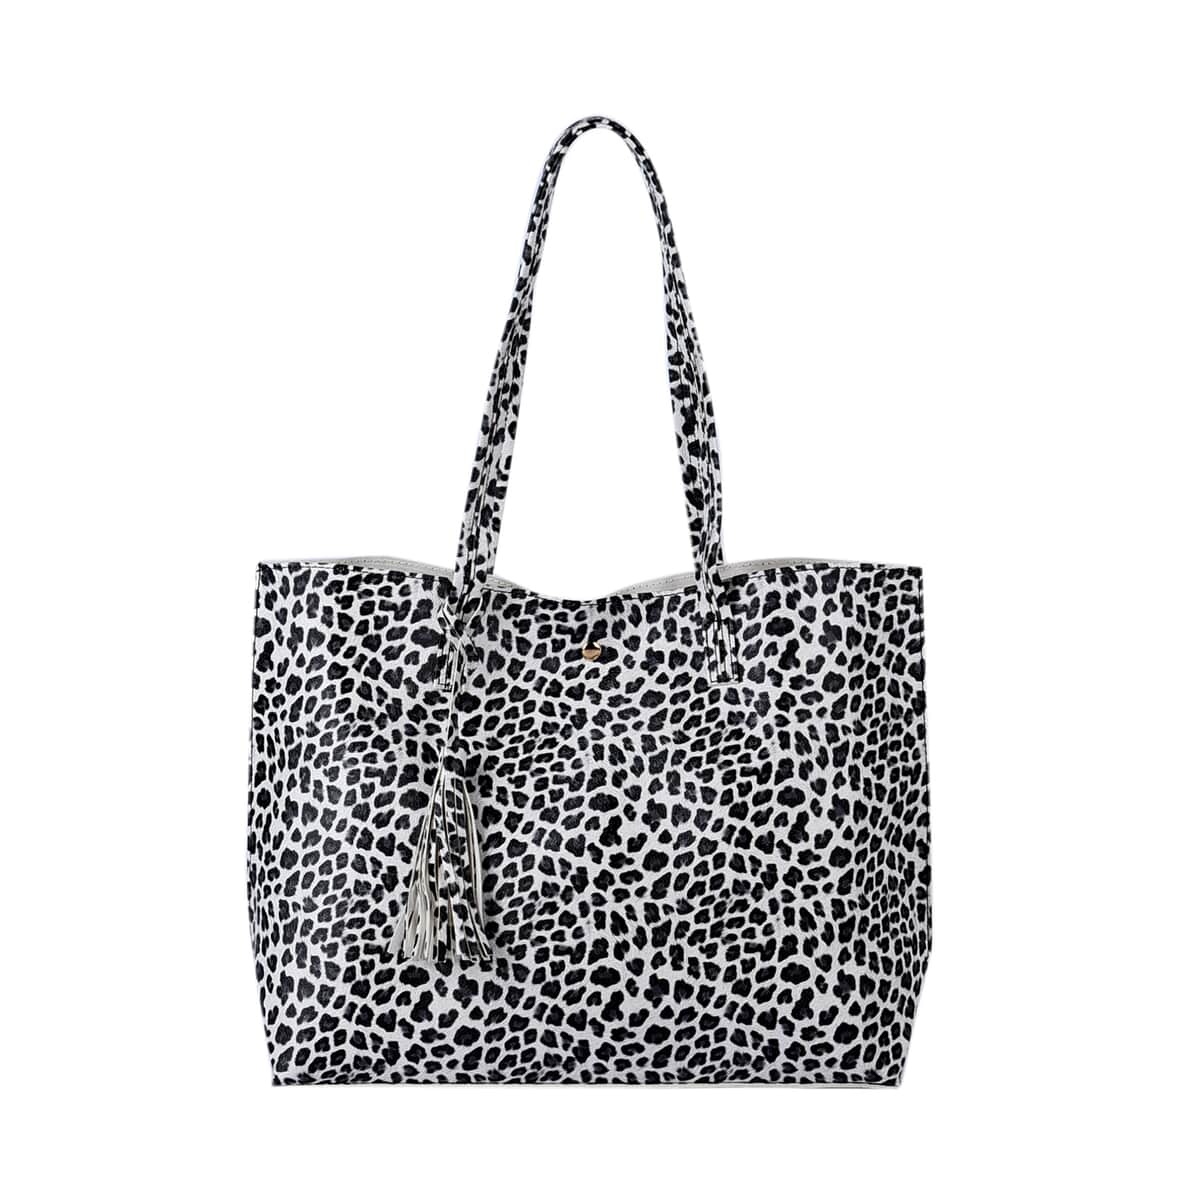 PASSAGE Black Leopard Pattern Faux Leather Tote Bag (14.2"x4.33"x11.81") with Handle Drop (9") image number 0